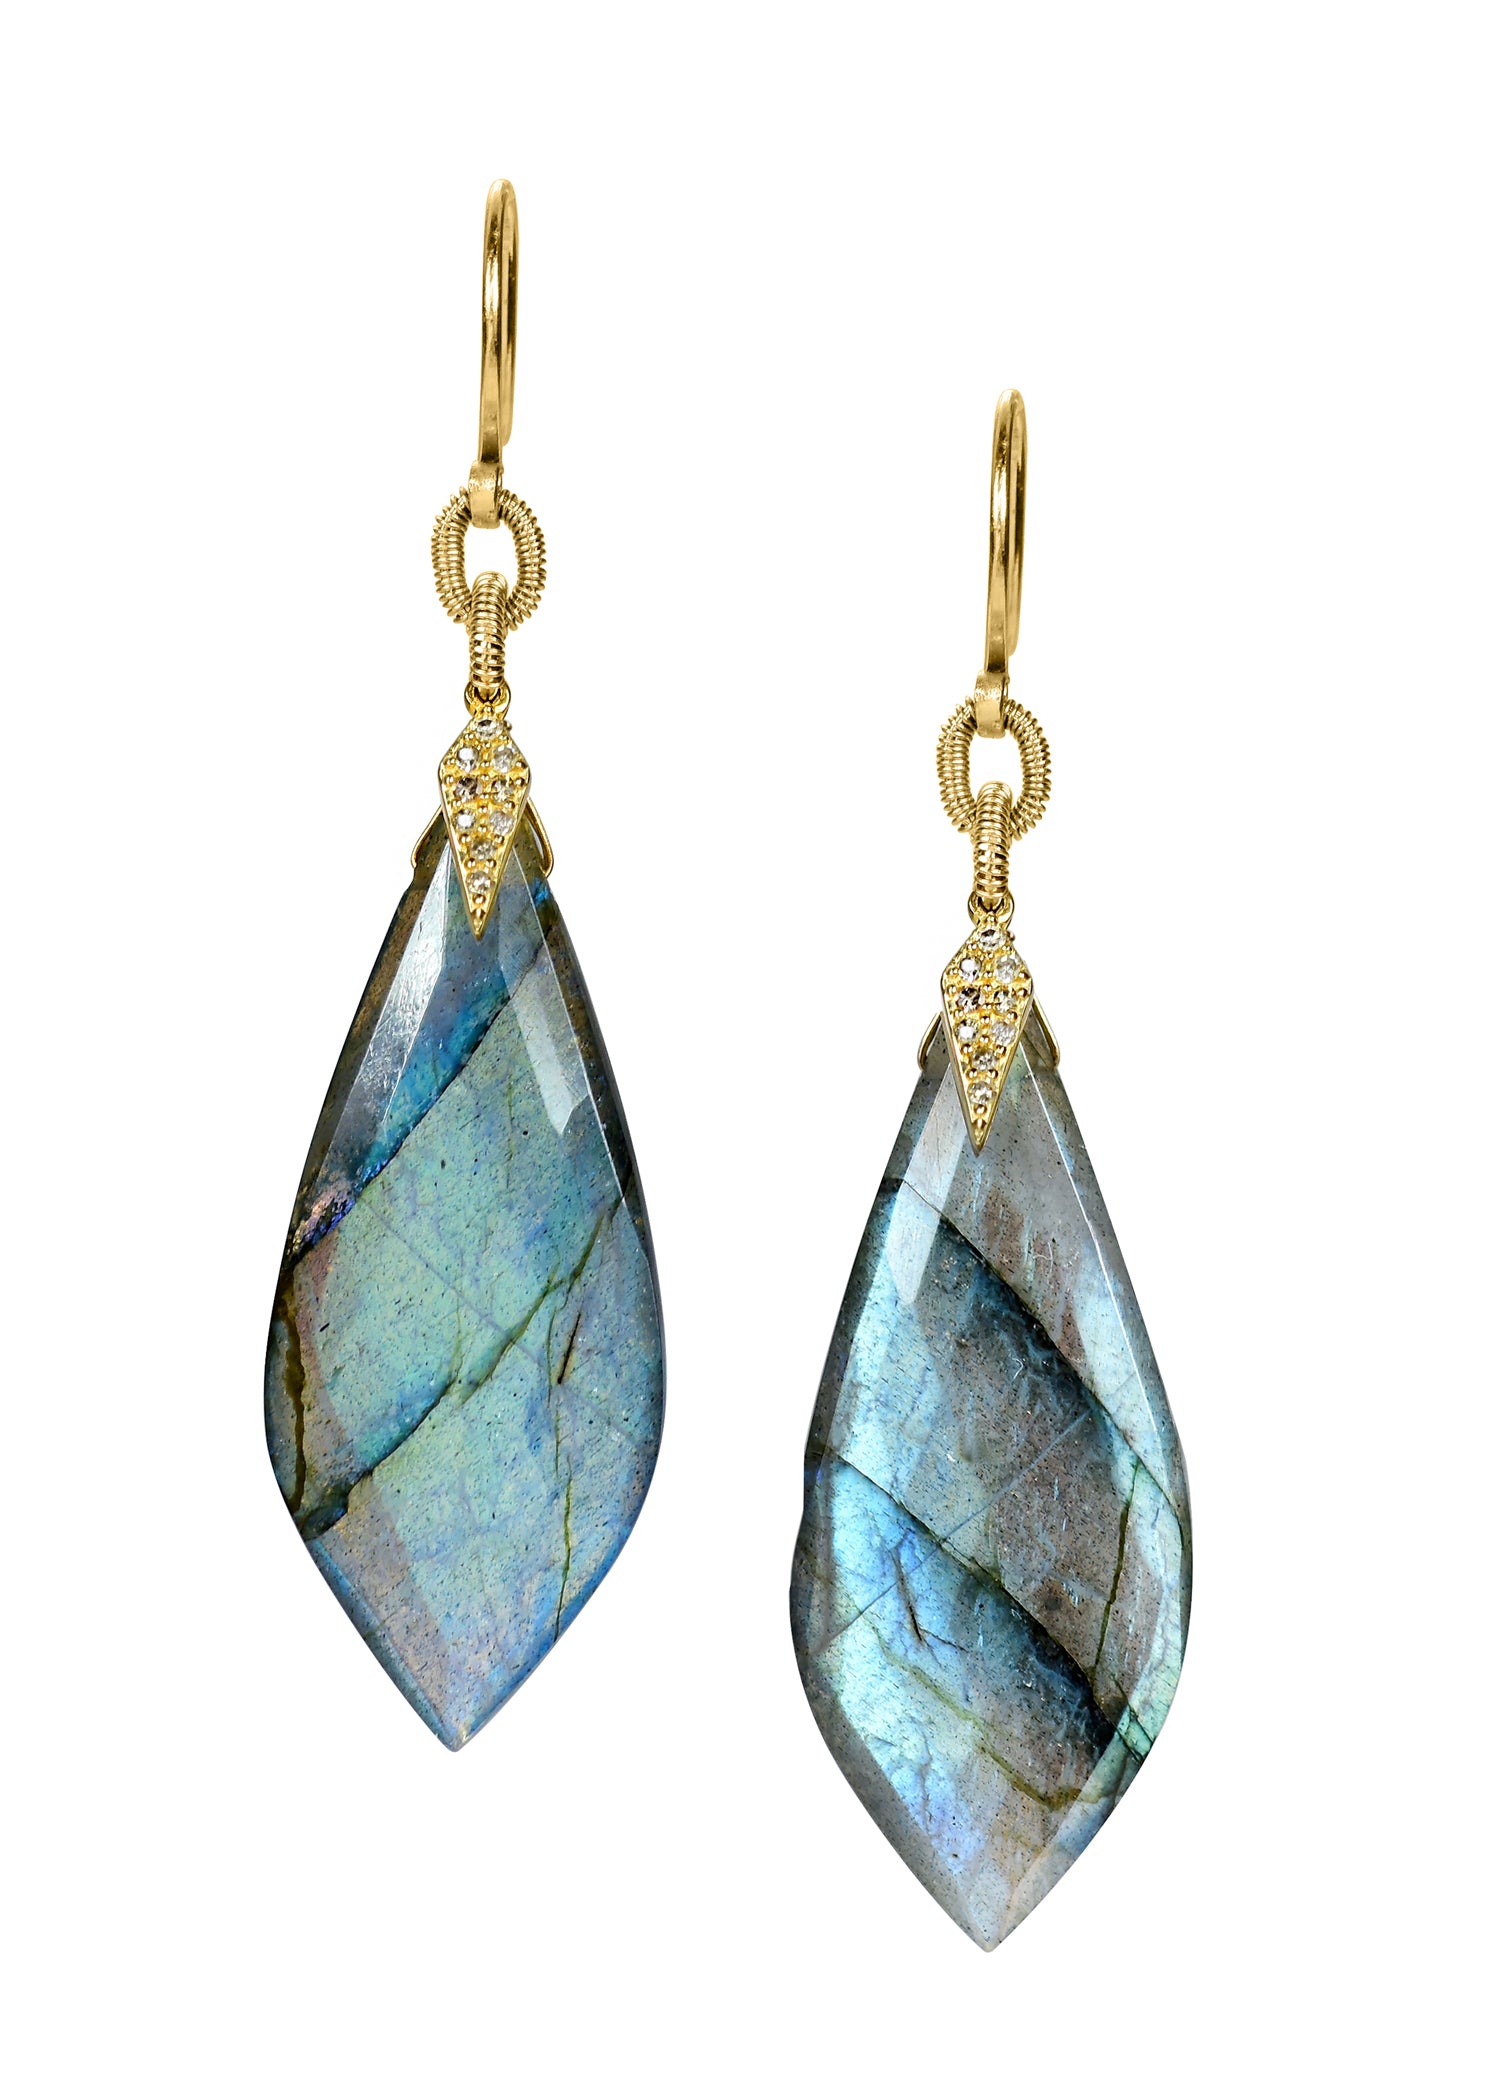 Diamond Labradorite 14k gold Special order only Earrings measure 2-5/16" in length (including the ear wires) and 5/8" of an inch in width at the widest point Handmade in our Los Angeles studio